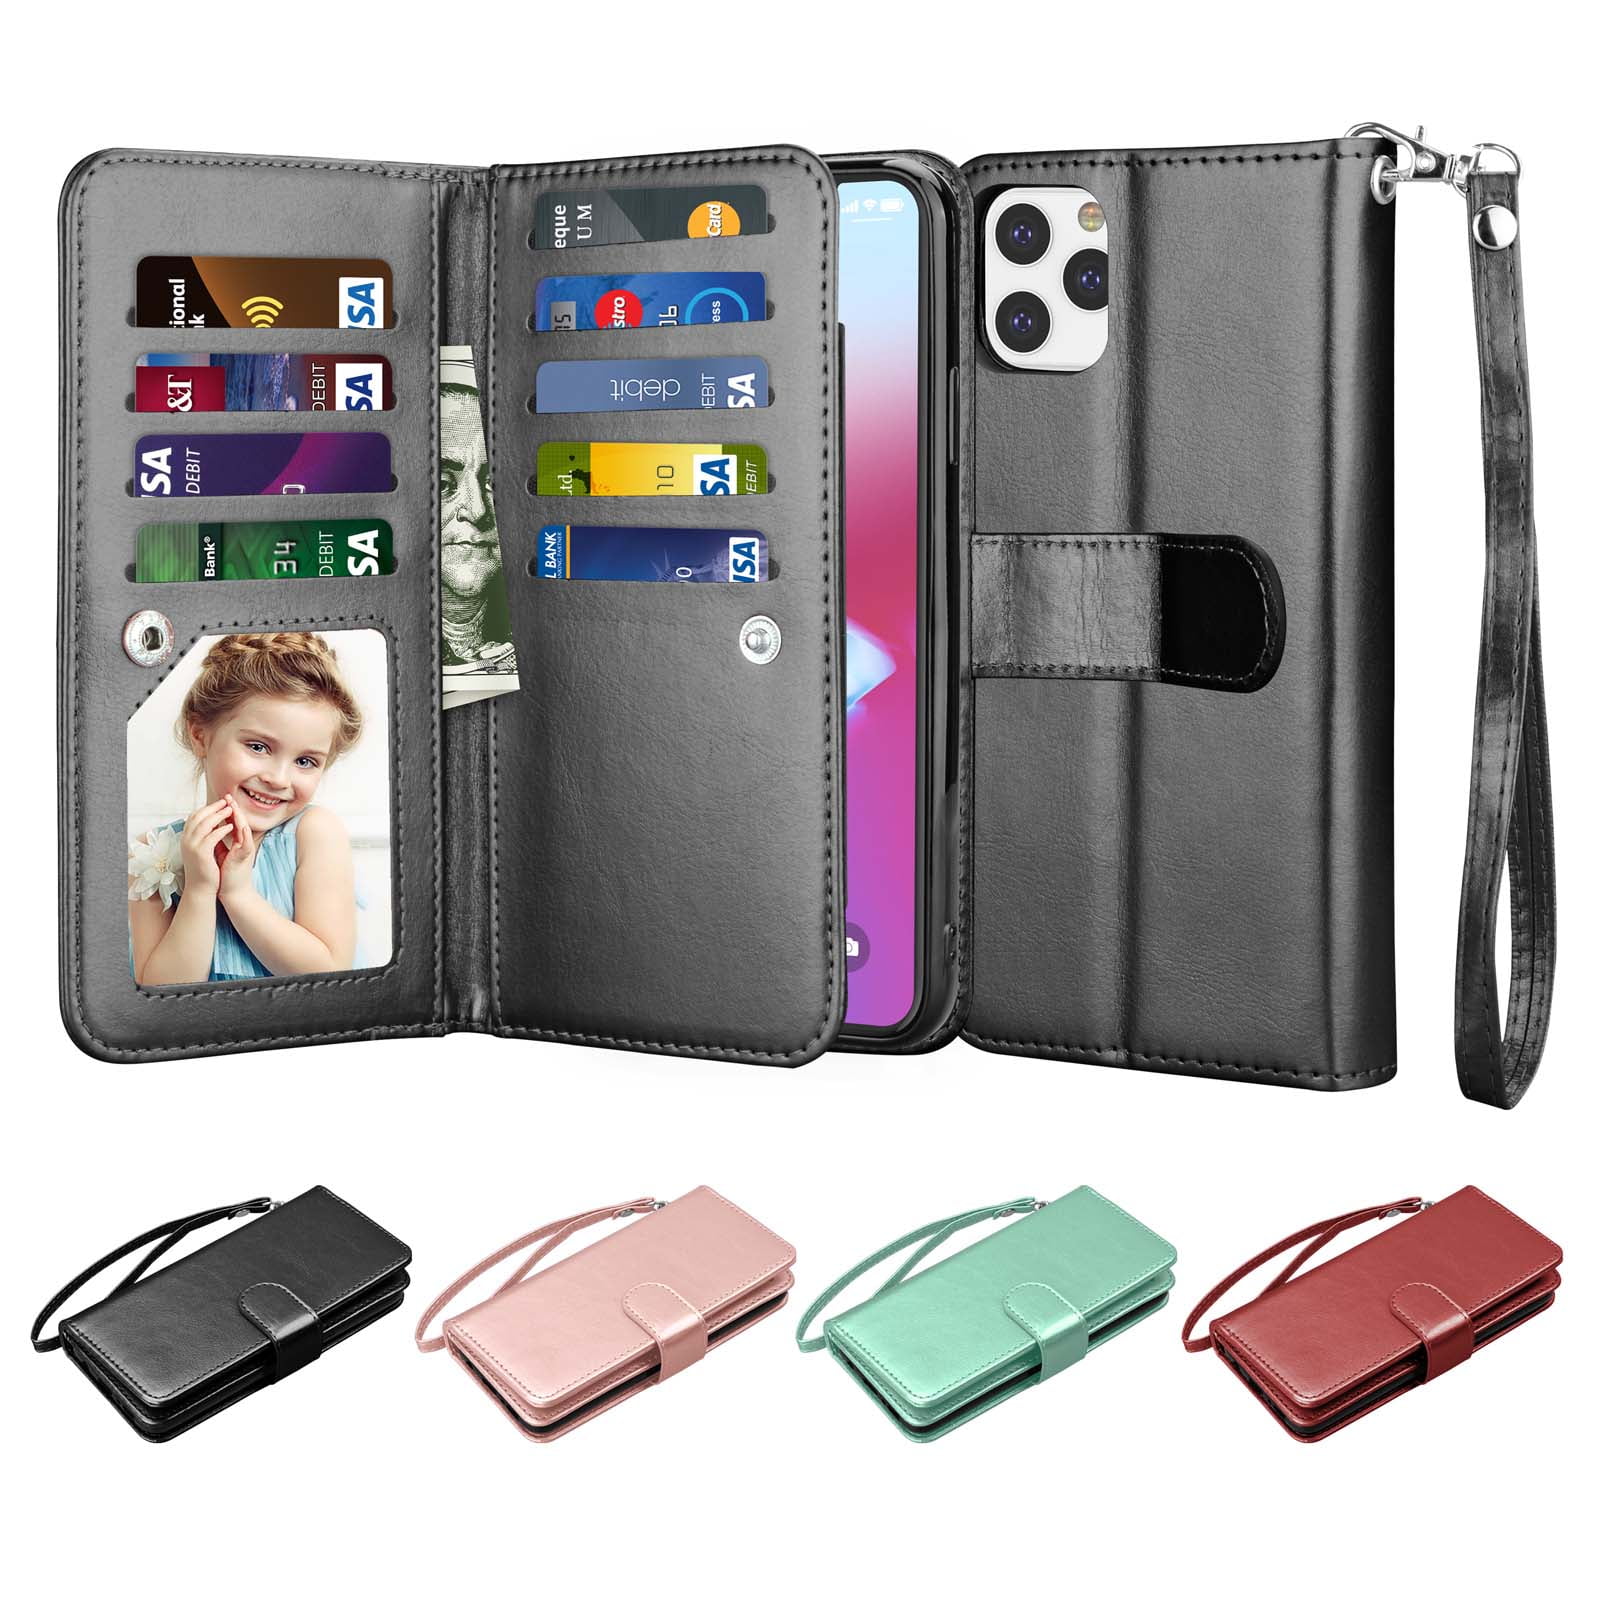 Stylish Cover Compatible with iPhone 11 Pro Max black Leather Flip Case Wallet for iPhone 11 Pro Max 